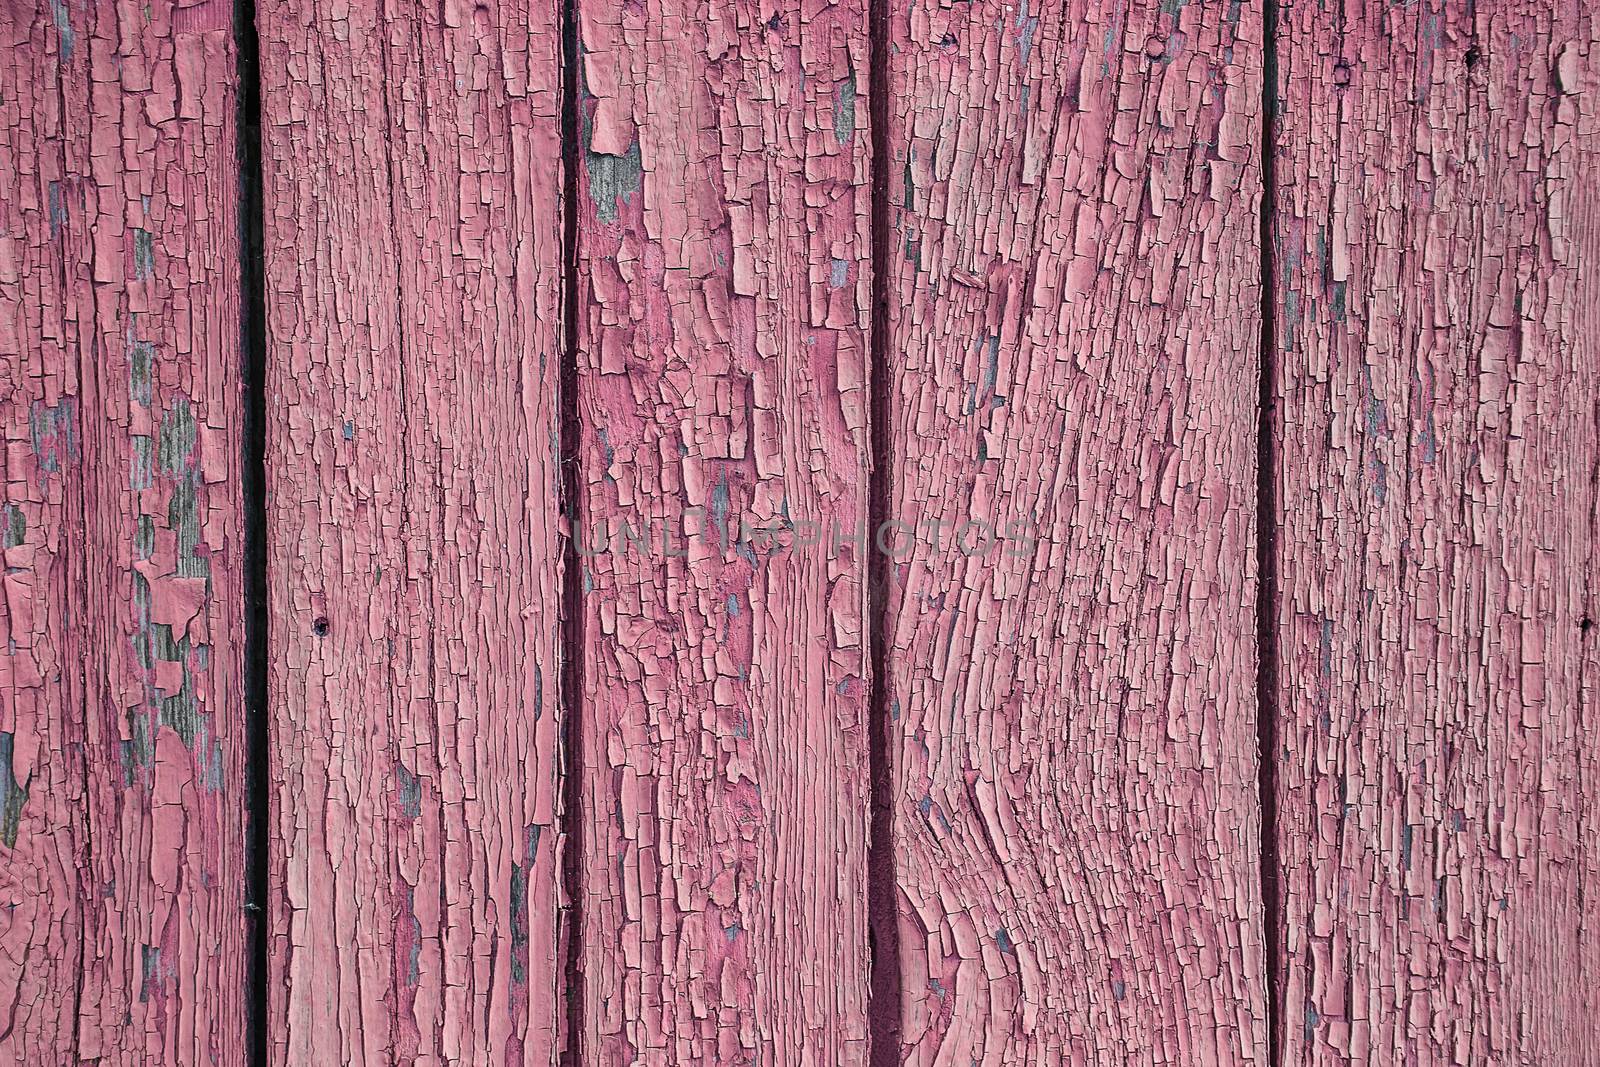 Cracking and peeling pink paint on a wall. Vintage wood background with green peeling paint. Old board with Irradiated paint